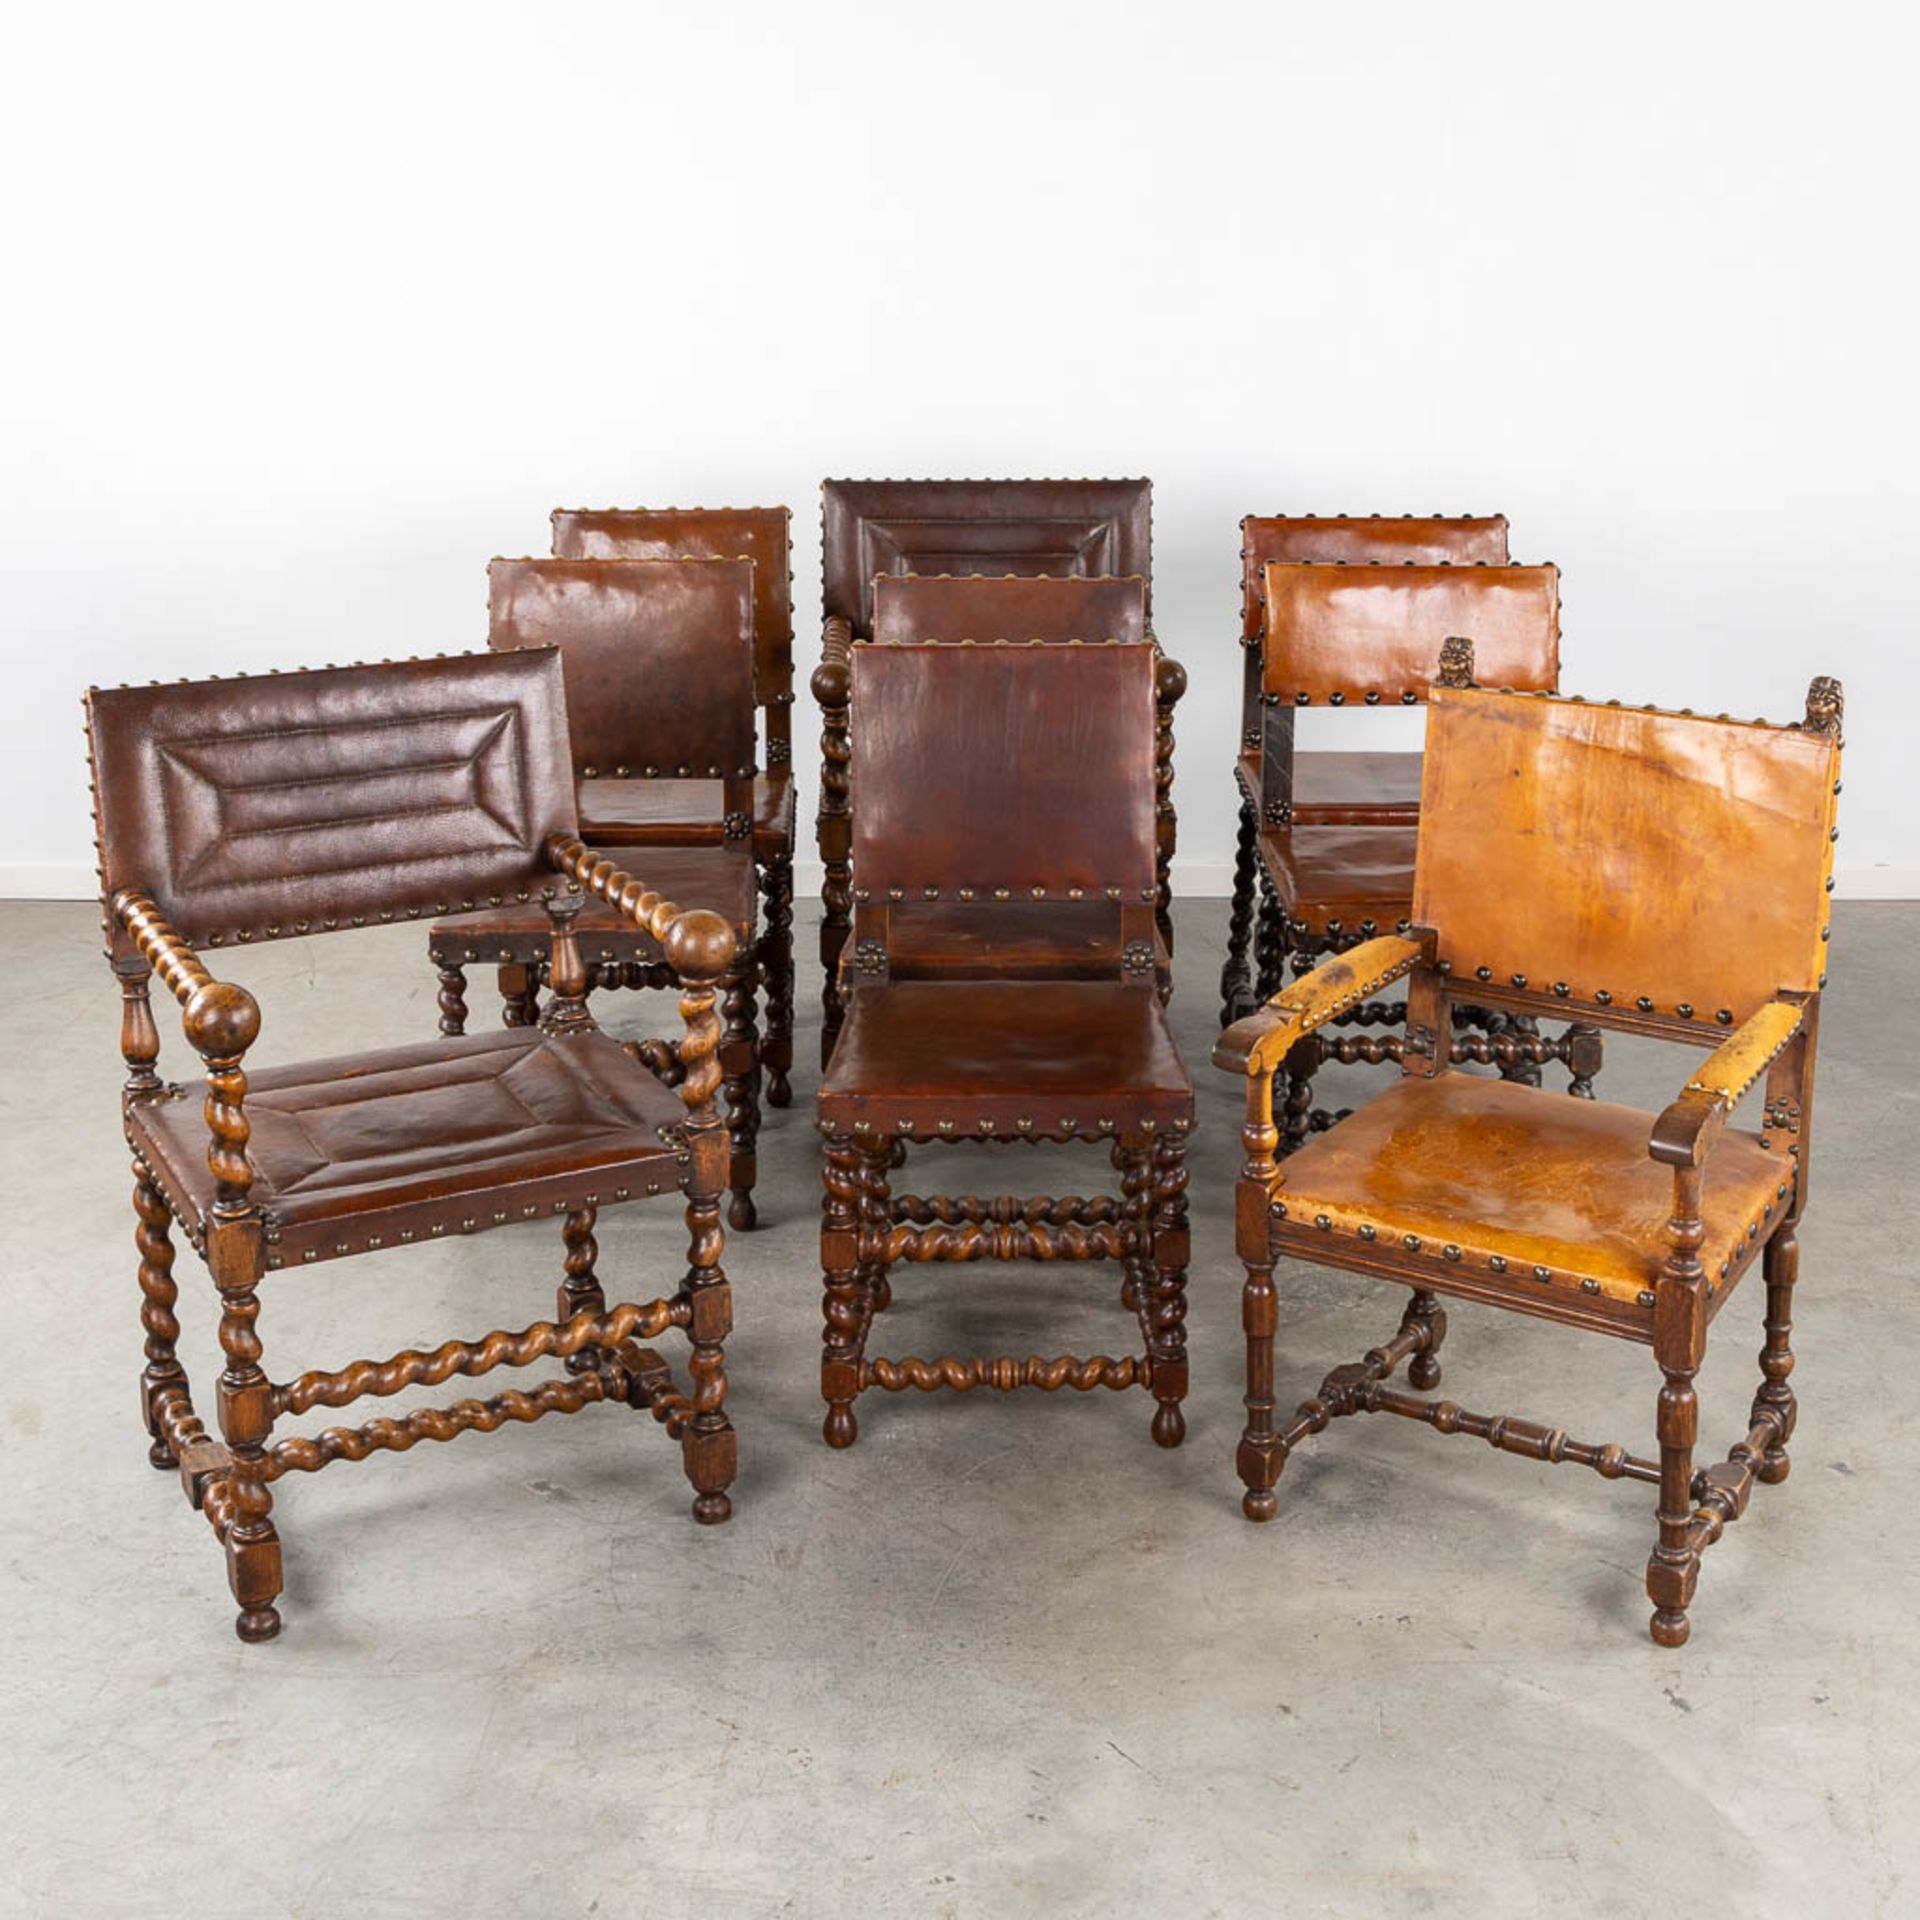 An assembled collection of chairs and armchairs, wood and leather. 9 pieces. (L:56 x W:59 x H:94 cm)